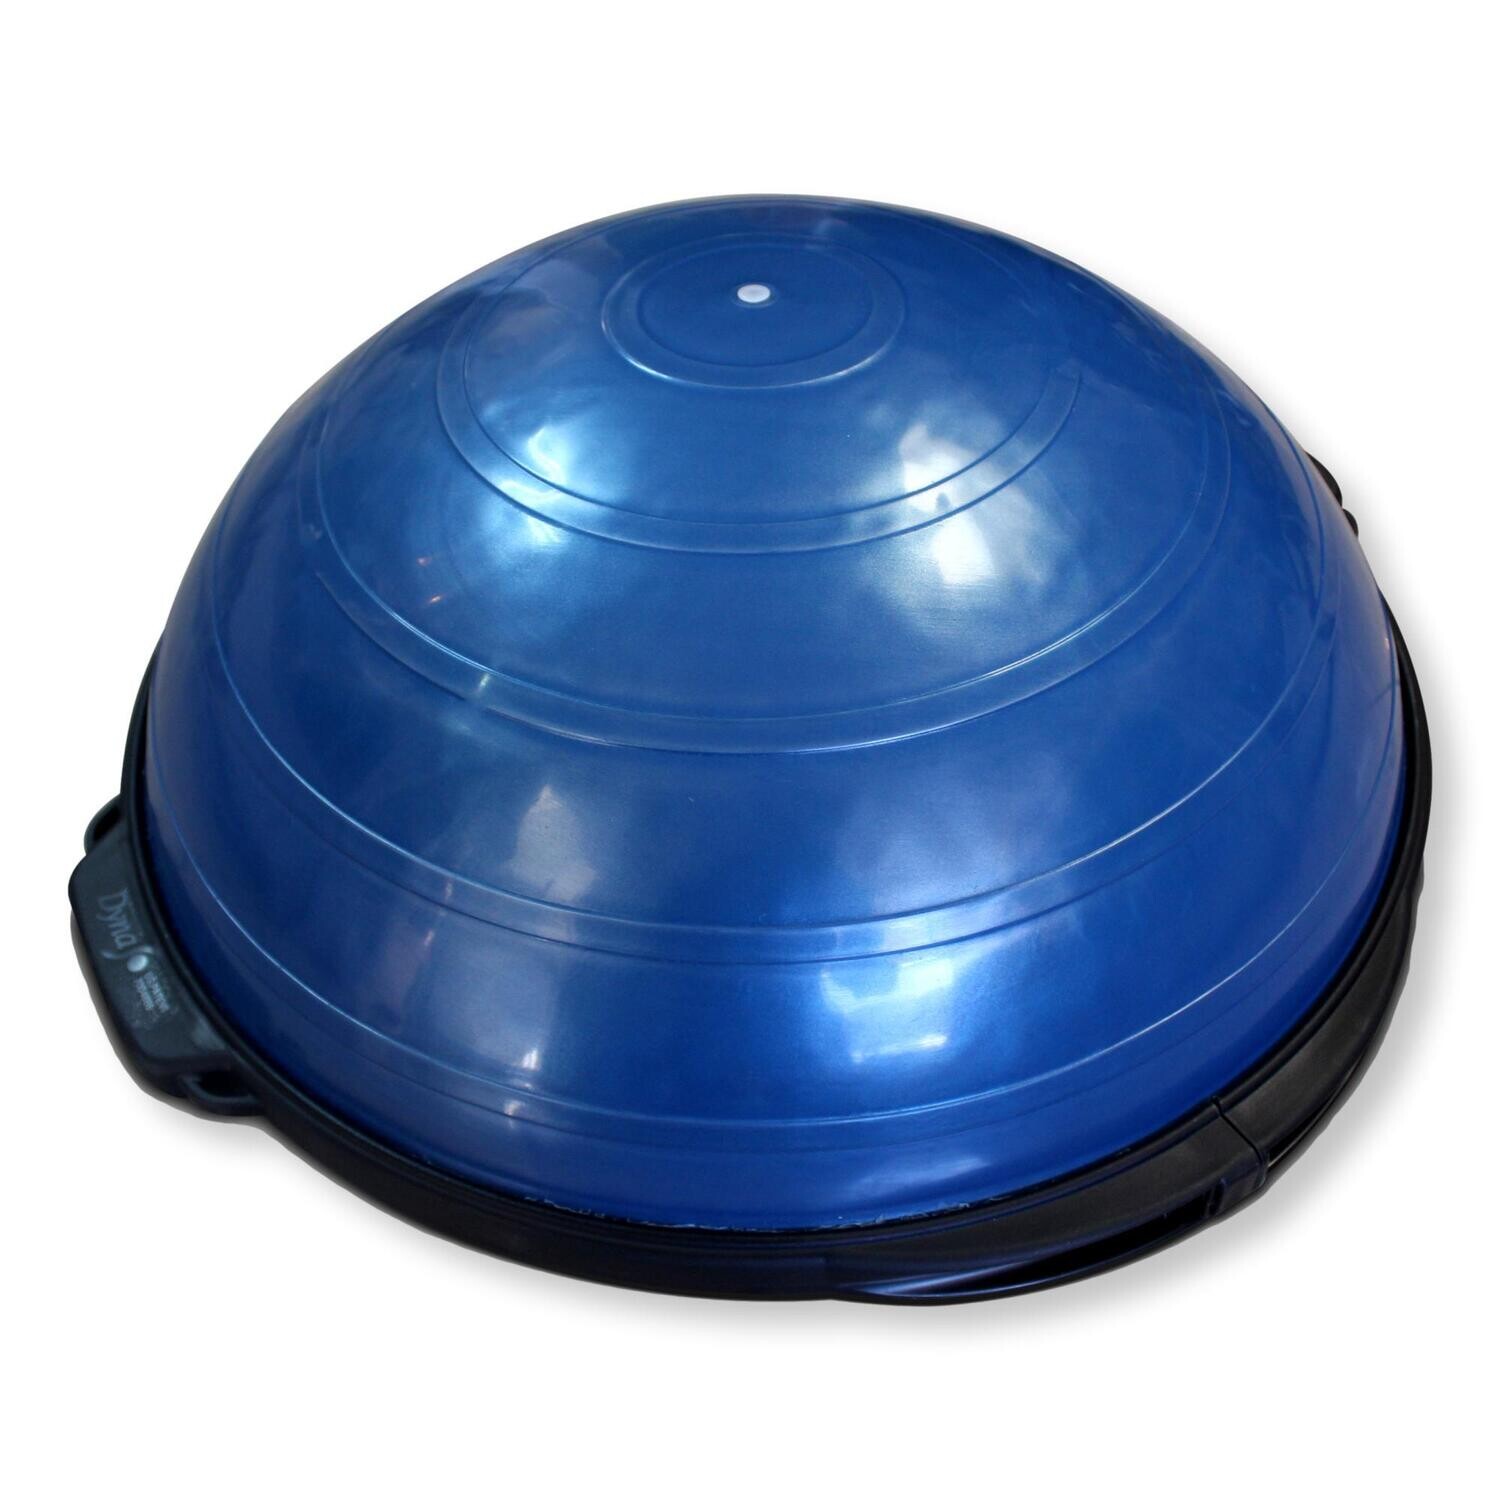 Bosu inflable